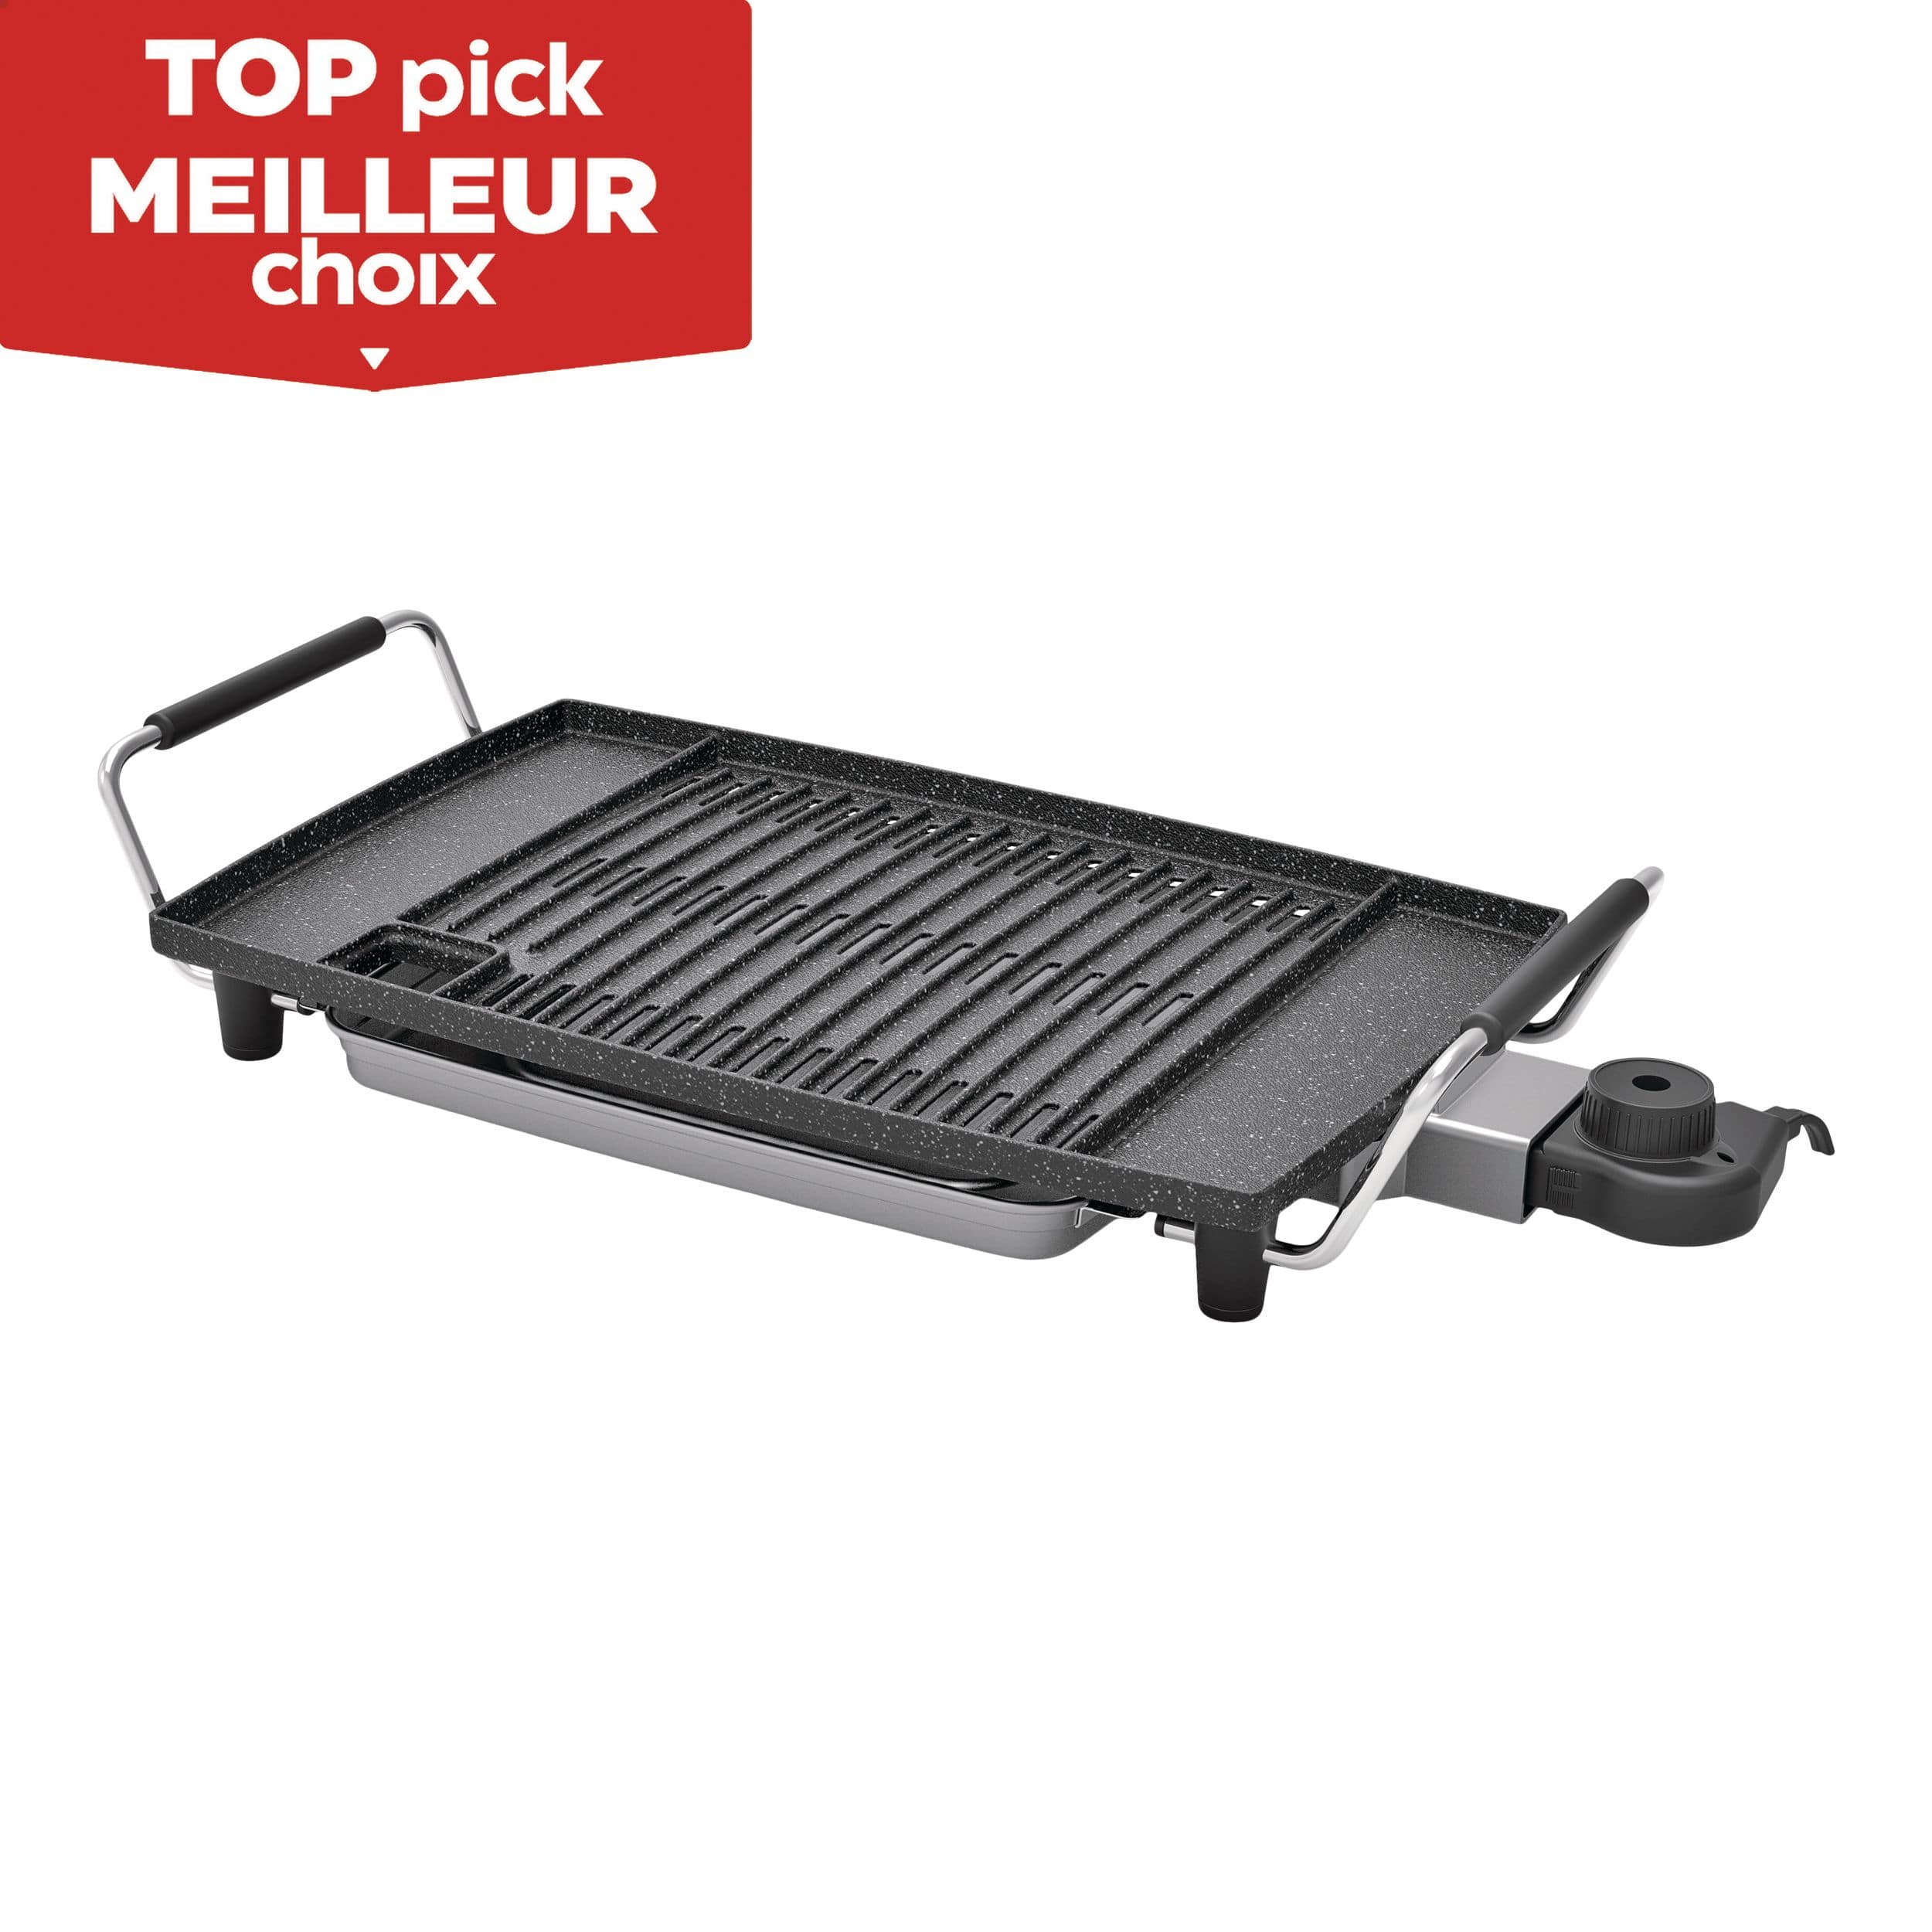 Starfrit The Rock 10-inch Indoor Smokeless Electric BBQ Grill - Curacao 